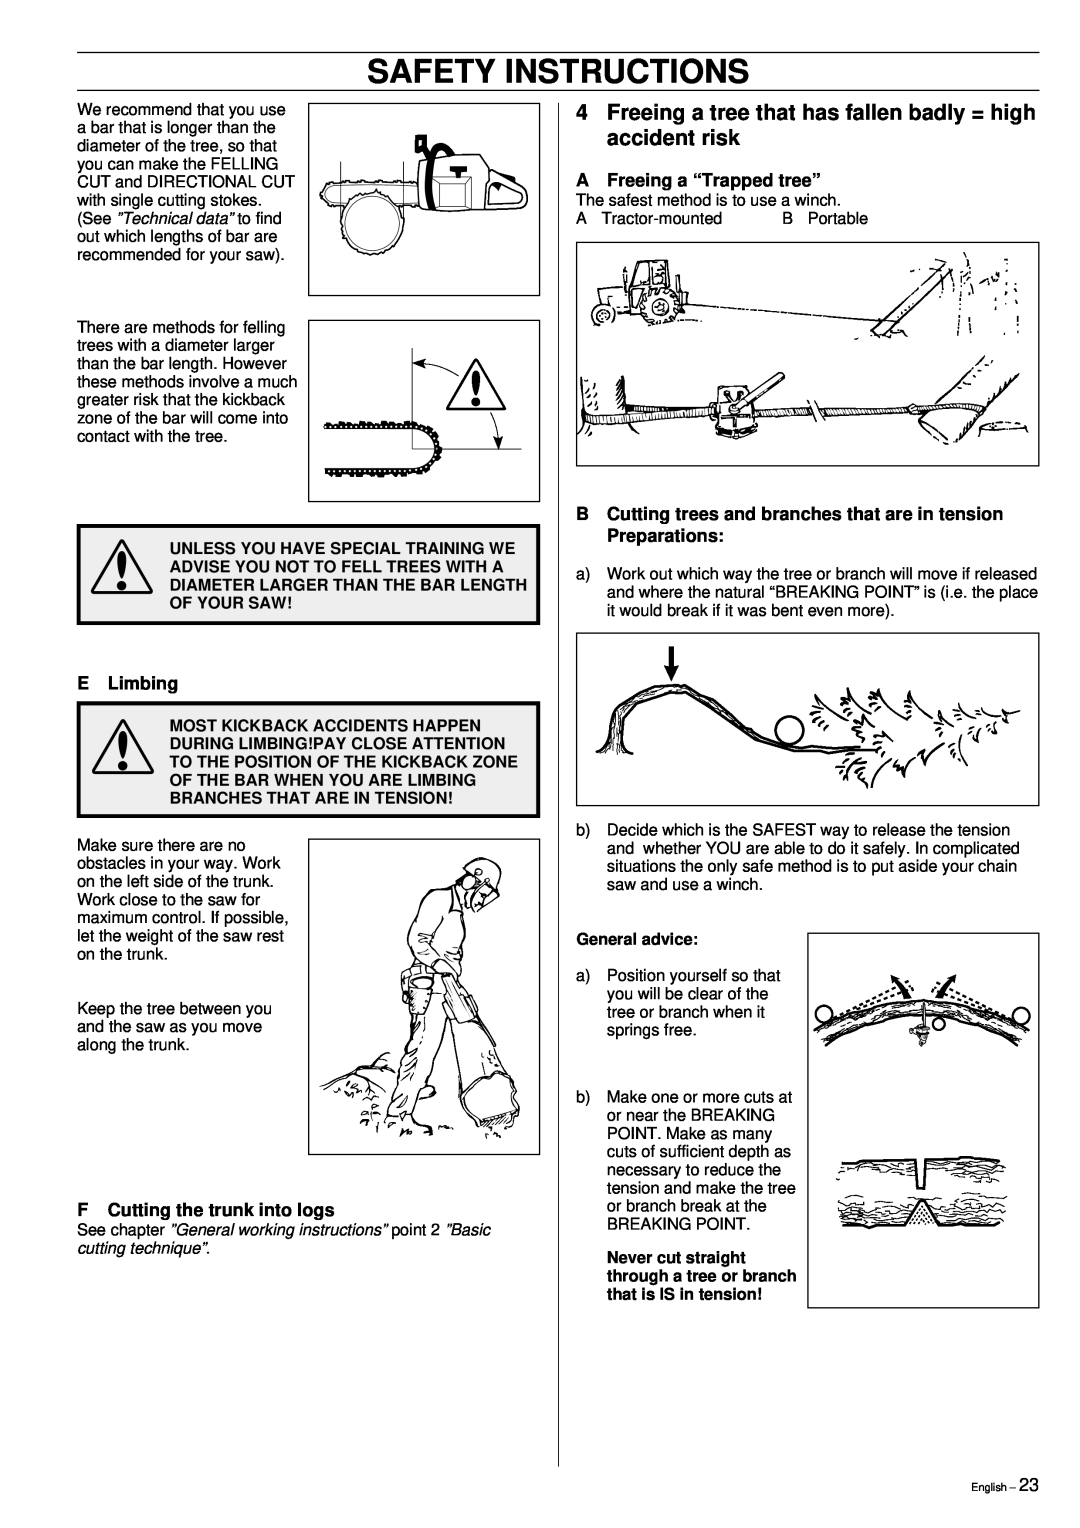 Husqvarna 395XP manual Safety Instructions, E Limbing, F Cutting the trunk into logs, AFreeing a “Trapped tree” 